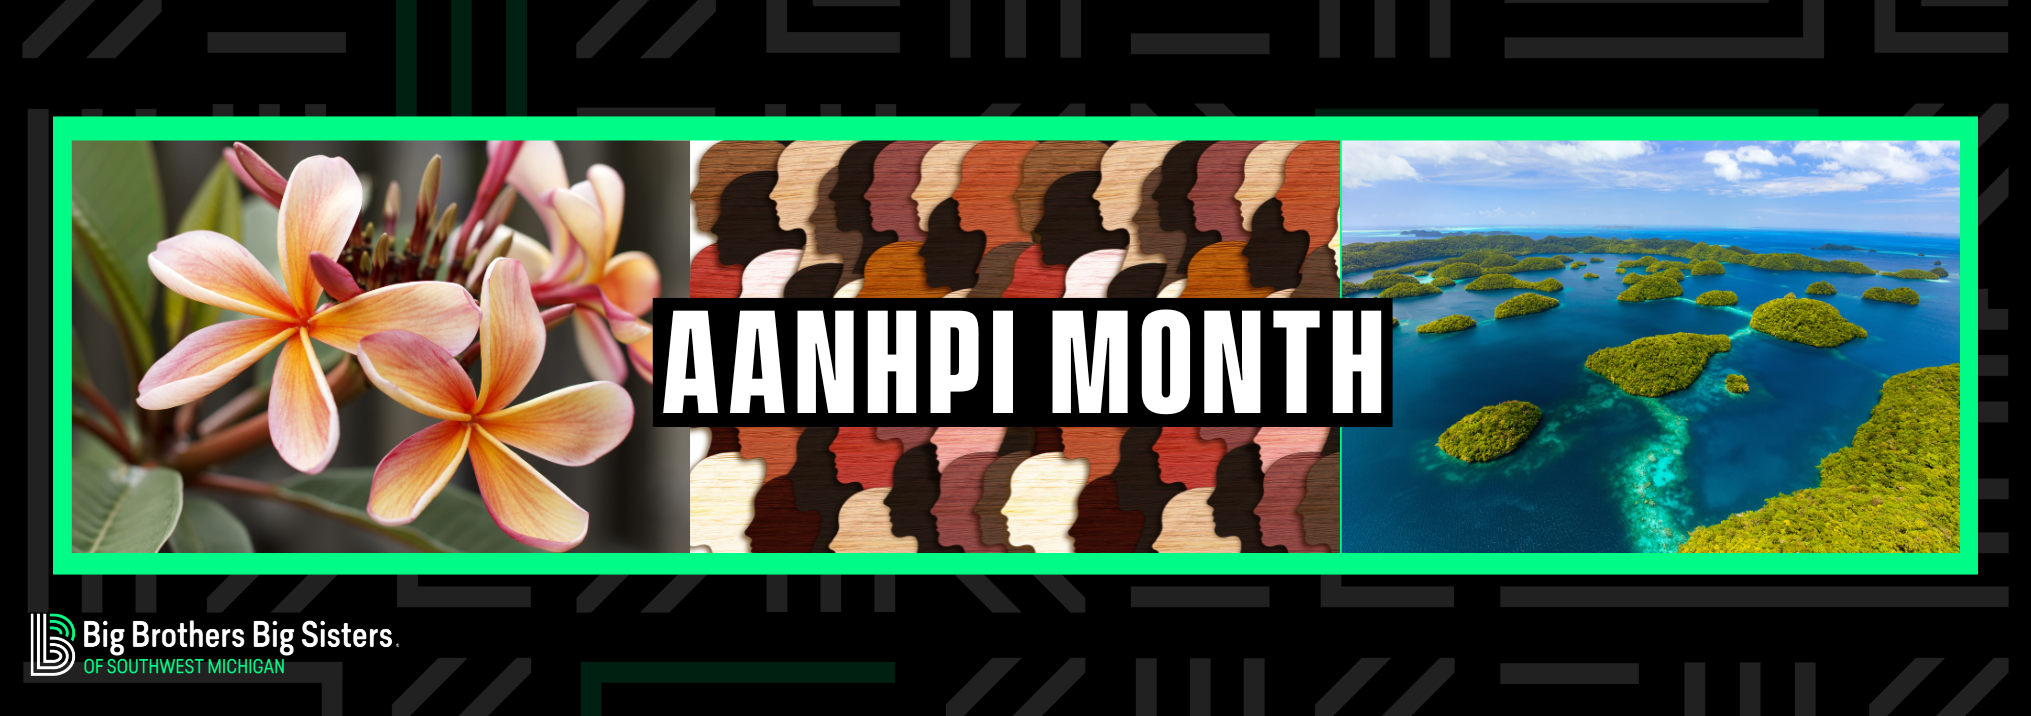 MAY IS NATIONAL AANHPI MONTH